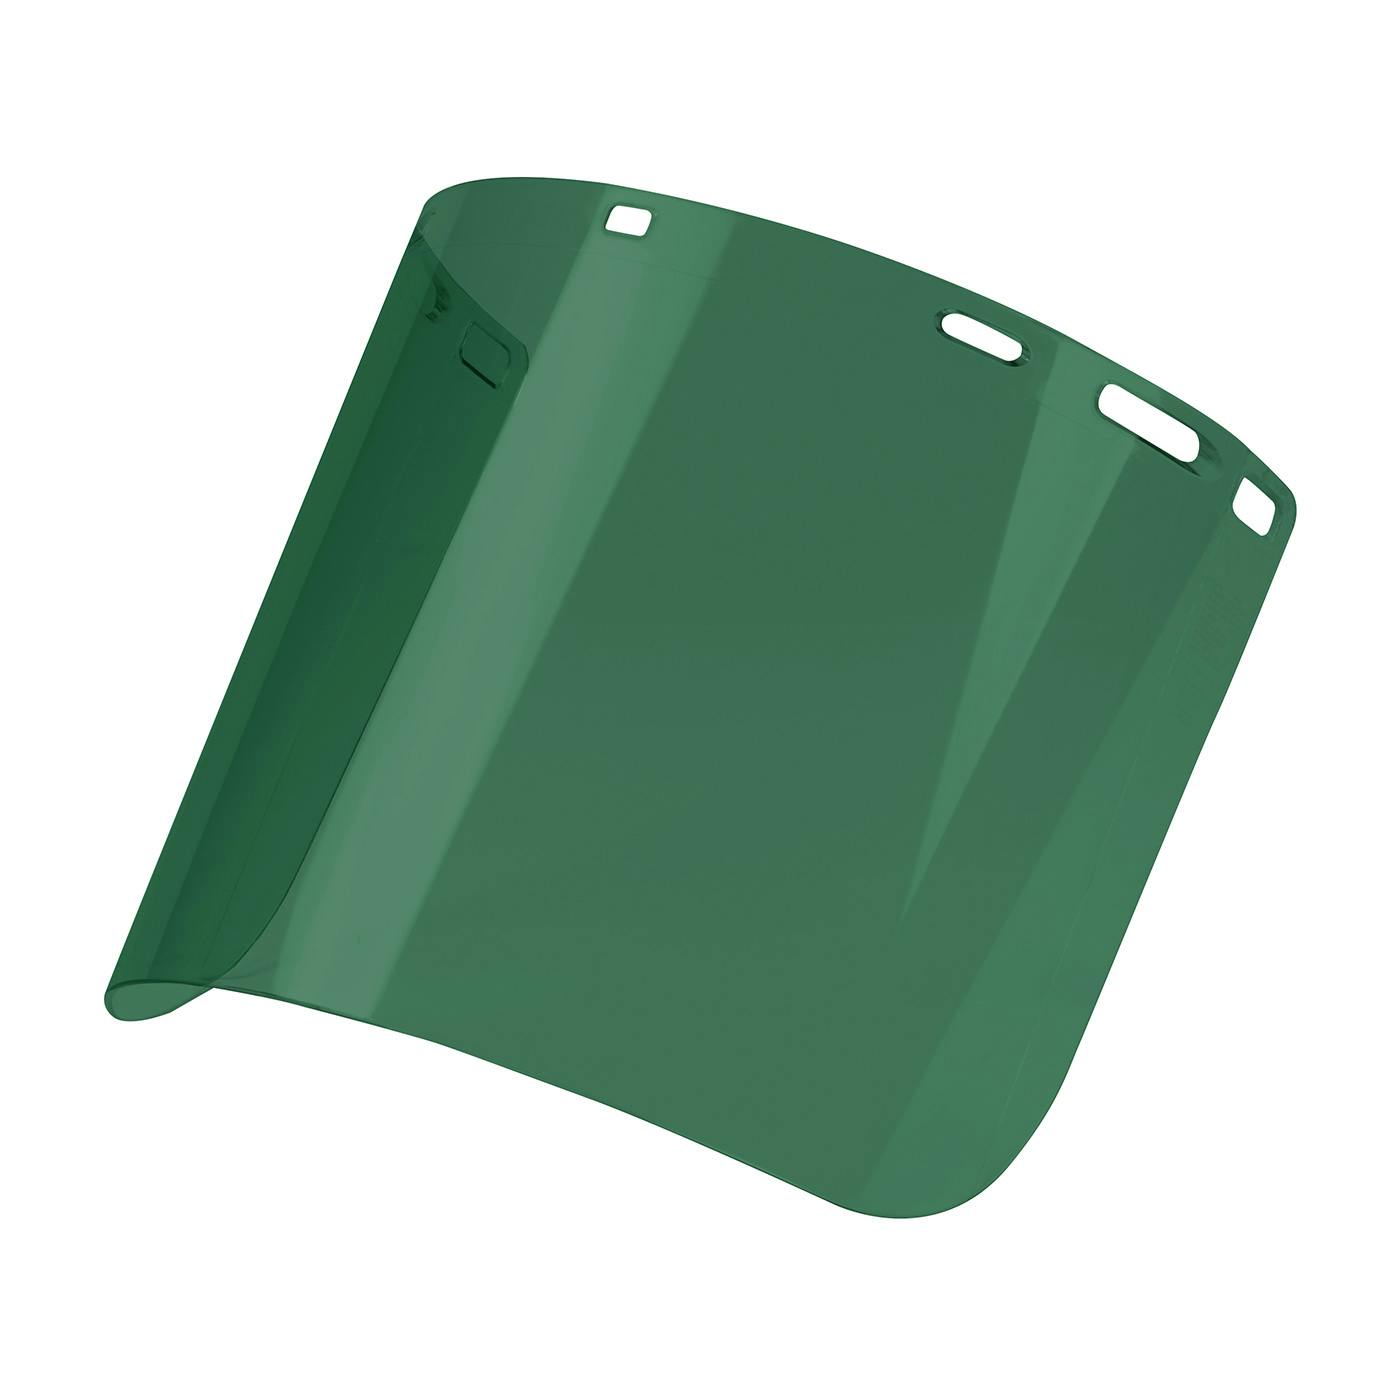 Uncoated Polycarbonate Safety Visor - Dark Green Tint, Green (251-01-7312) - OS